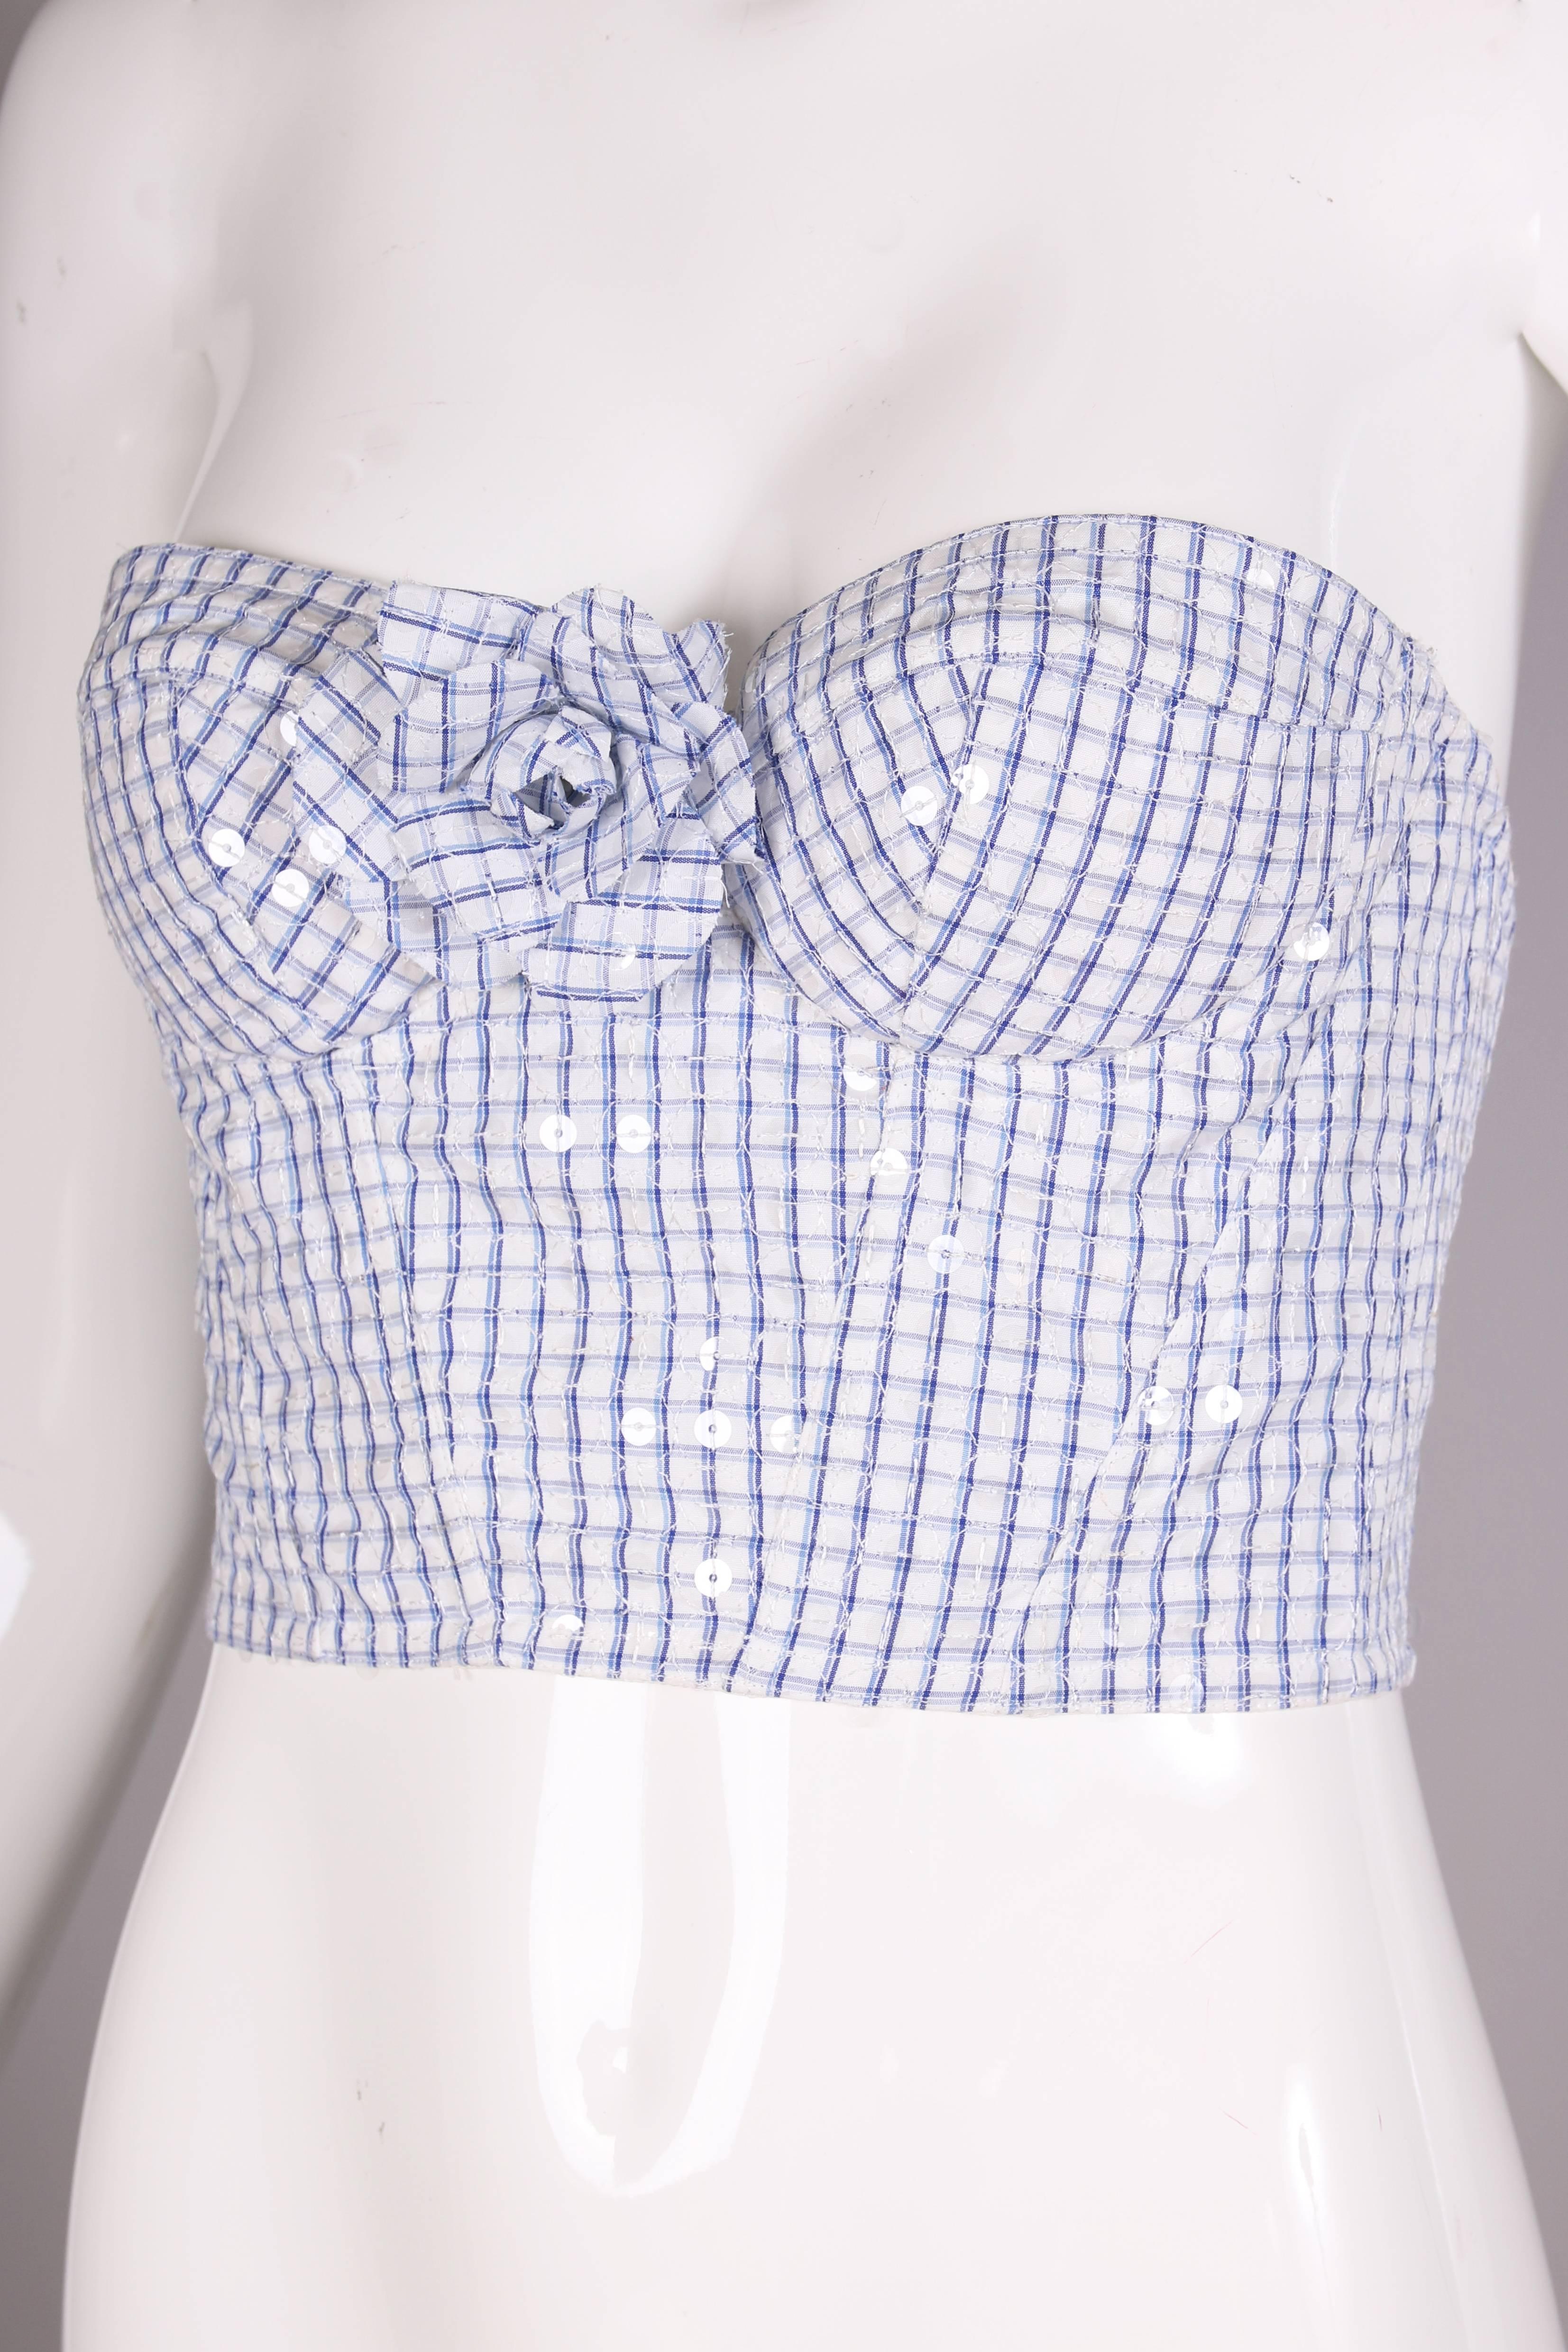 1995 Chanel blue & white gingham bustier with clear sequins. Elasticized ruching at back clasps for stretch and a matching camellia pin that can be detached. Lined in 100% silk. In excellent condition. Size EU 38.
MEASUREMENTS:
Bust - 34